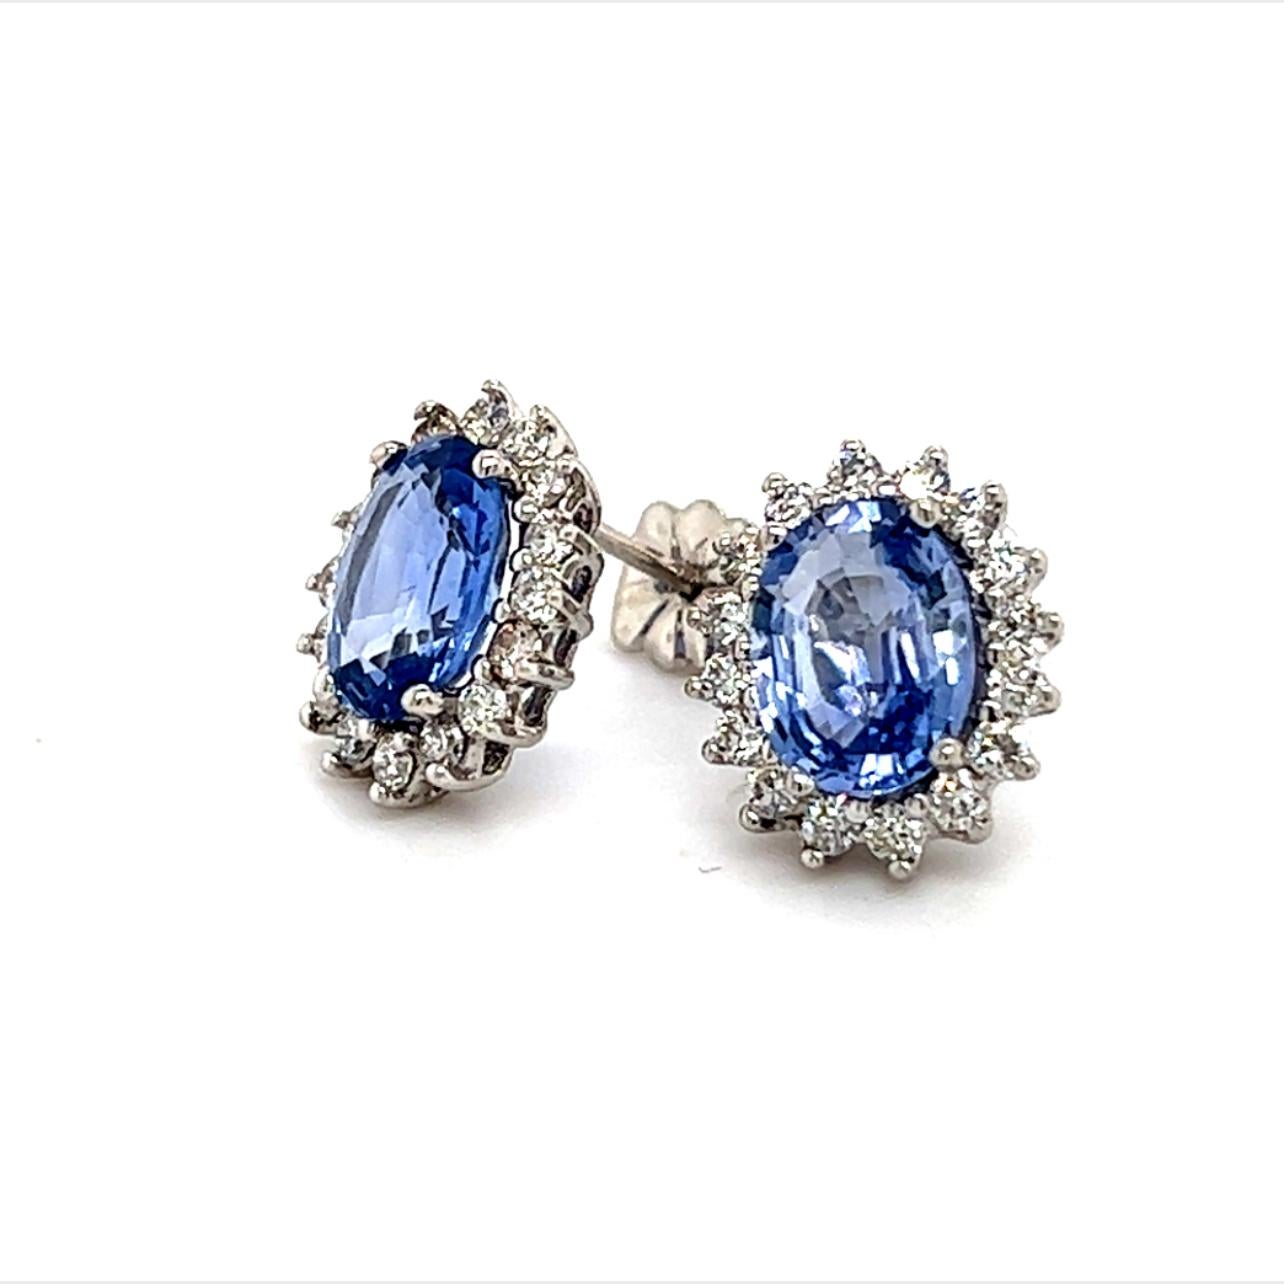 Natural Sapphire Diamond Earrings 14k Gold 3.2 TCW Certified $5,950 211909

Nothing says, “I Love you” more than Diamonds and Pearls!

These Sapphire earrings have been Certified, Inspected, and Appraised by Gemological Appraisal